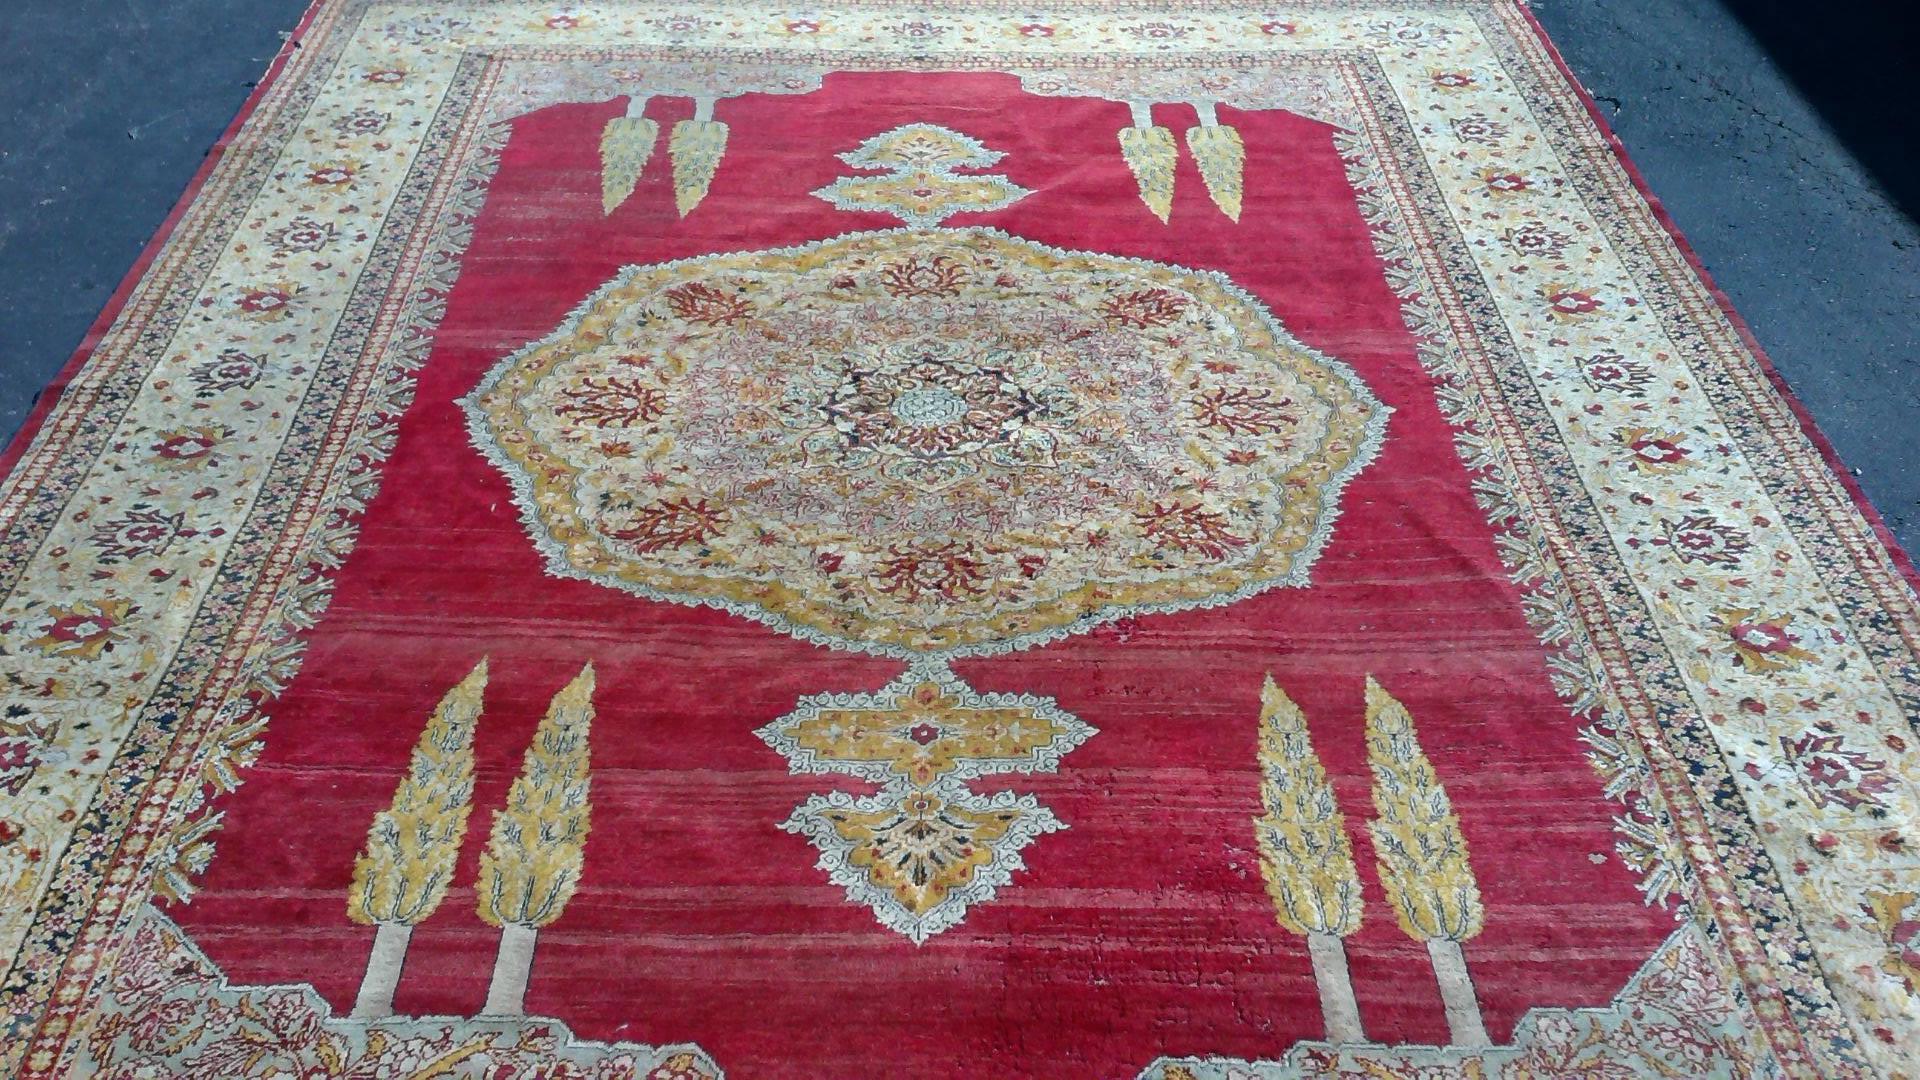 A gorgeous, large, predominantly red, antique Turkish Sivas rug. A beautiful one-of-a-kind rug with a large independent center medallion and a wide an elaborate decorative border. Colors include: red, cream, gold and blue. 

Measures: 10' 8